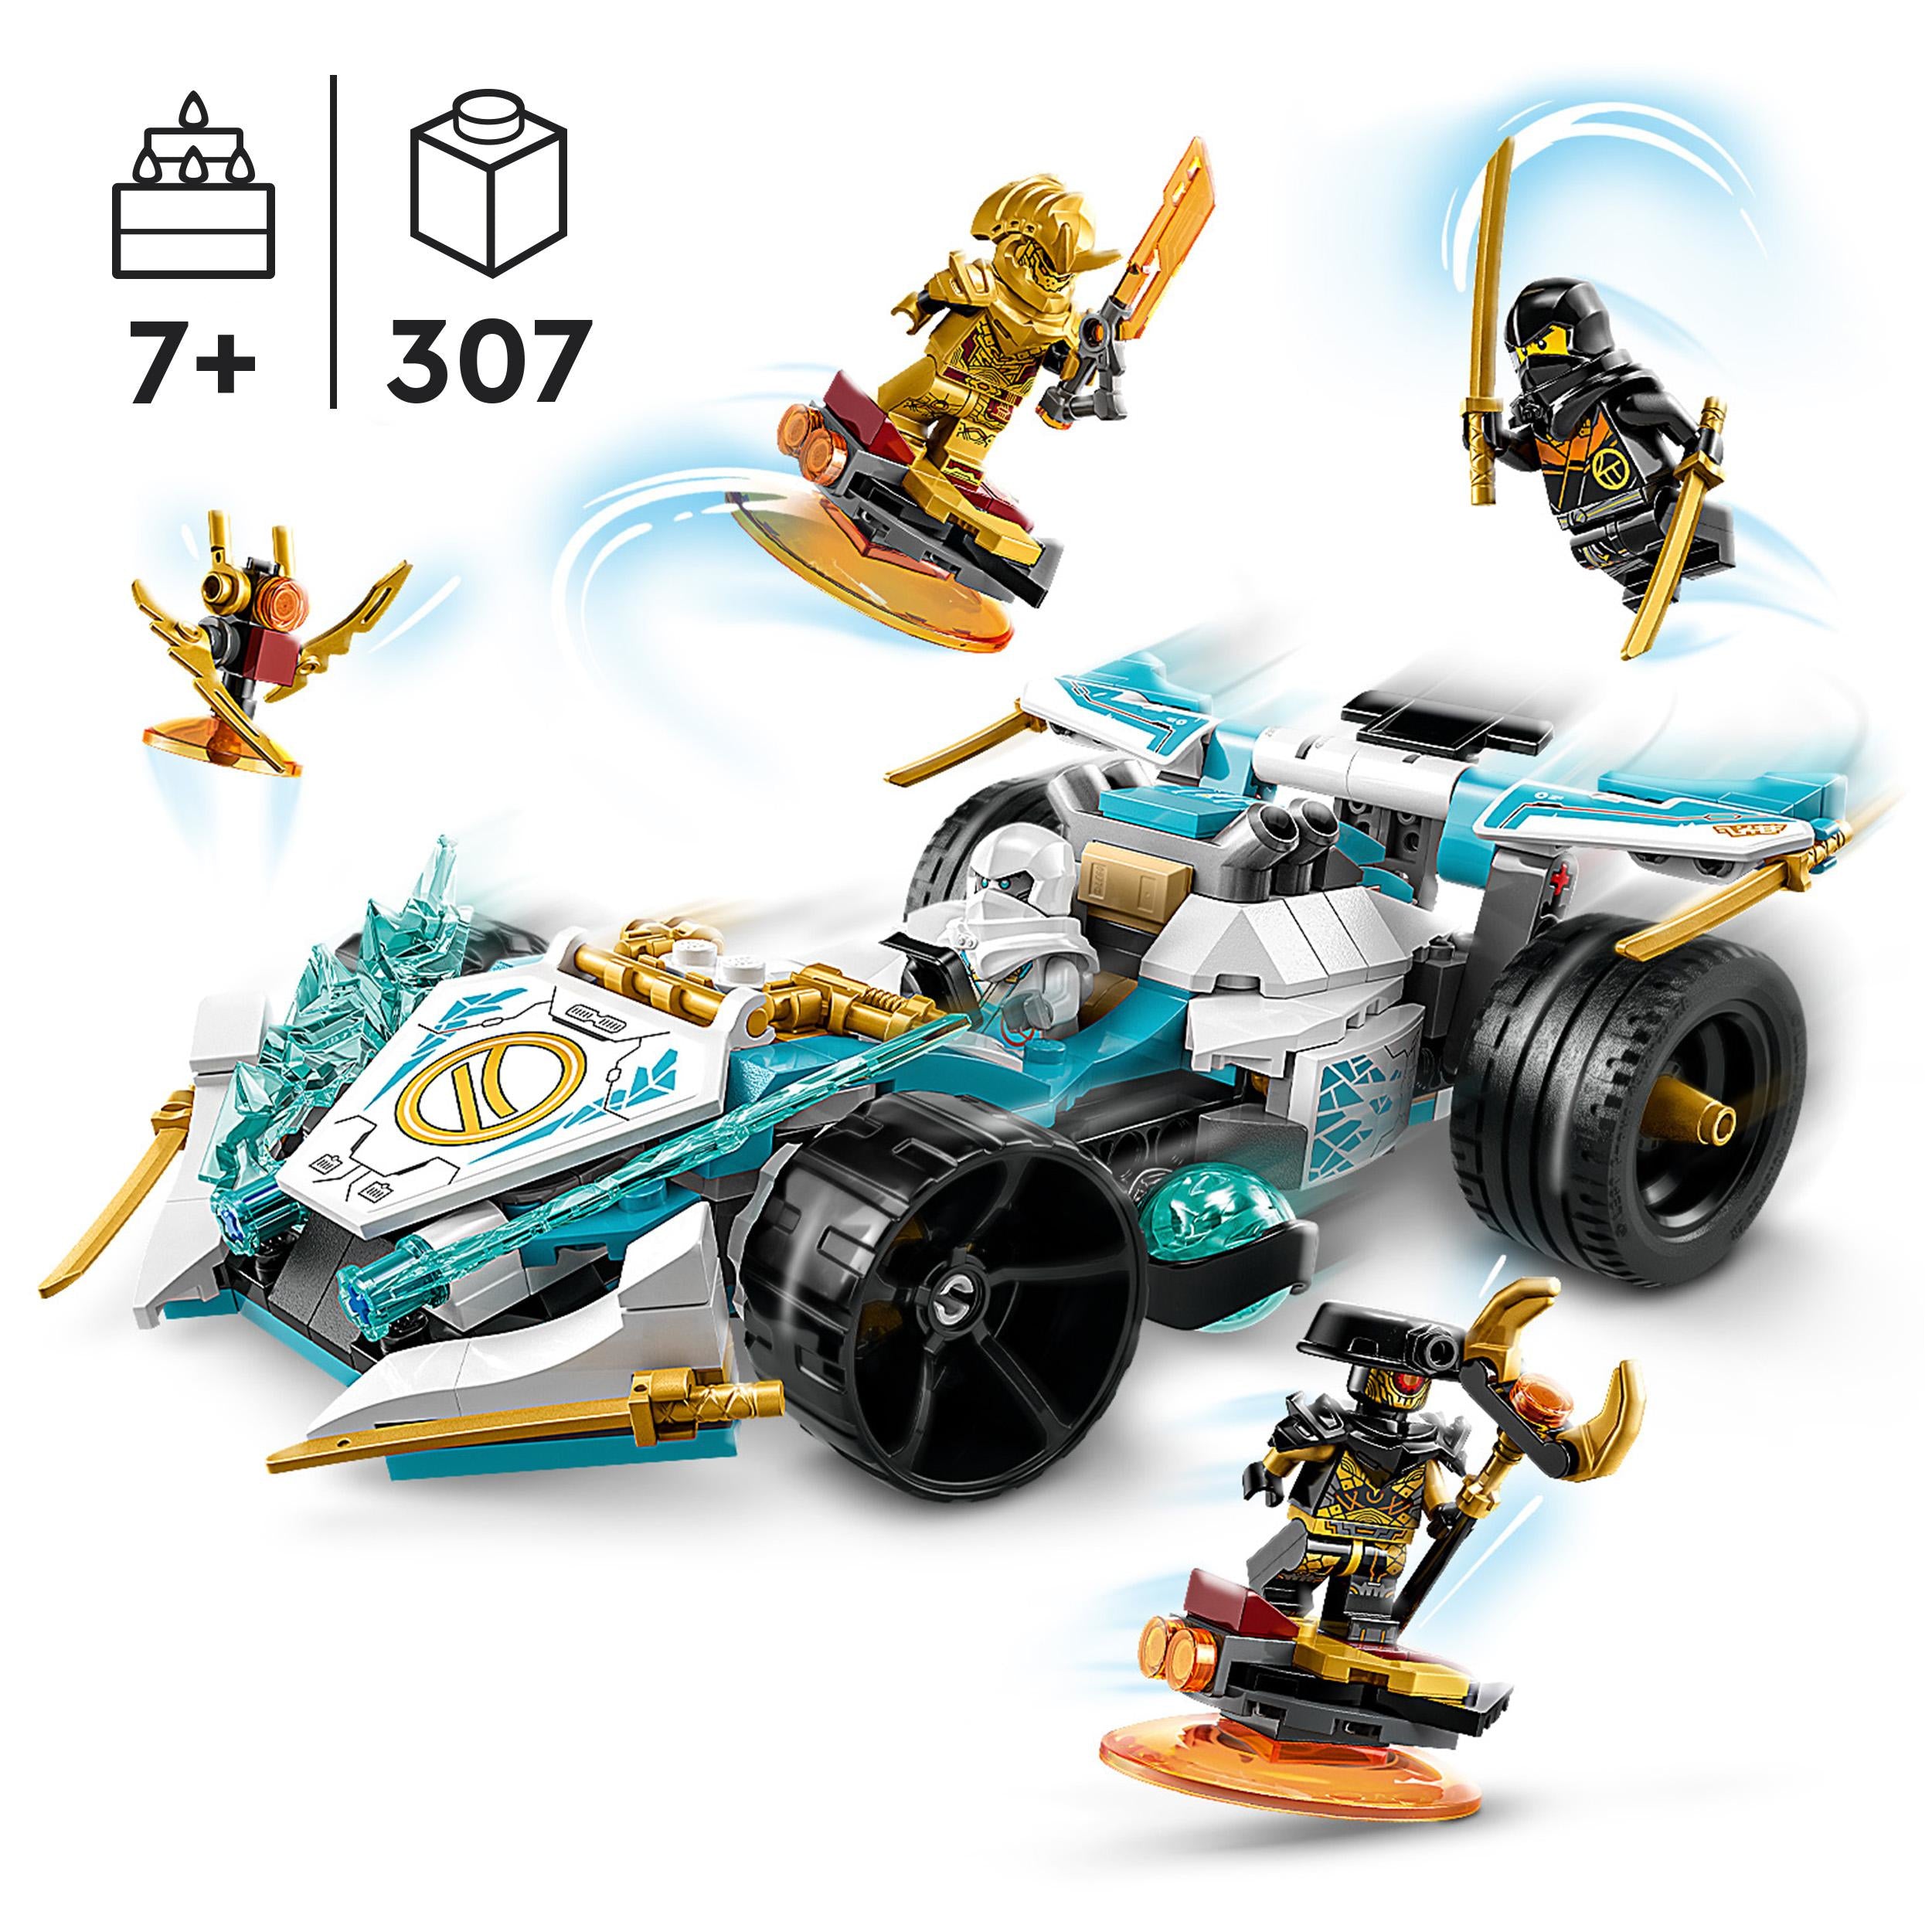 LEGO 71791 NINJAGO Zane's Dragon Power Spinjitzu Racing Car Toy for 7 Plus Year Old Kids, Boys & Girls, Vehicle Construction Set with Spinning Function and 4 Minifigures